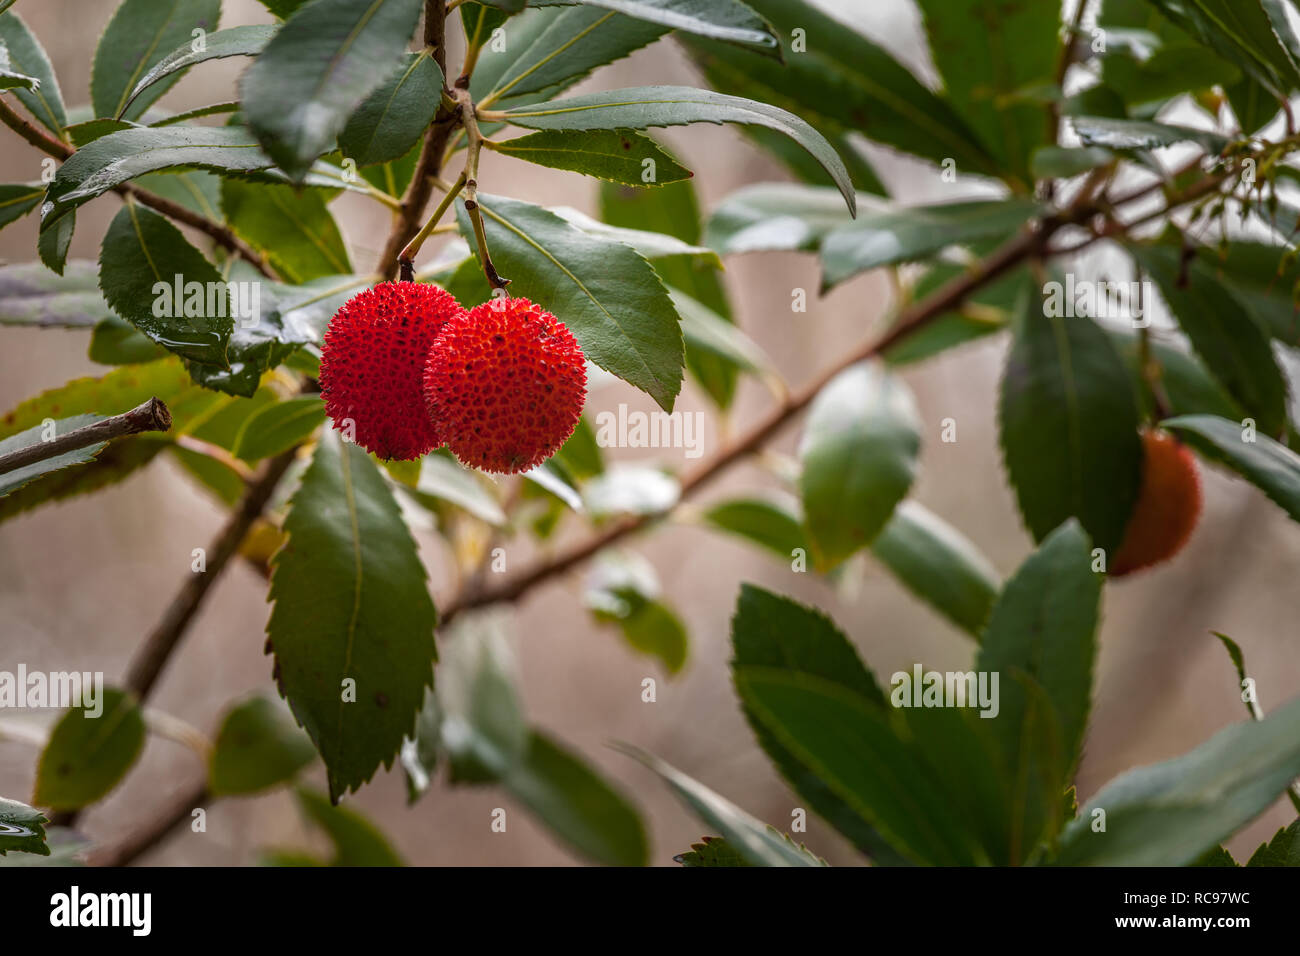 red drupe, sometimes called arbutus-berry, with a rough surface Stock Photo